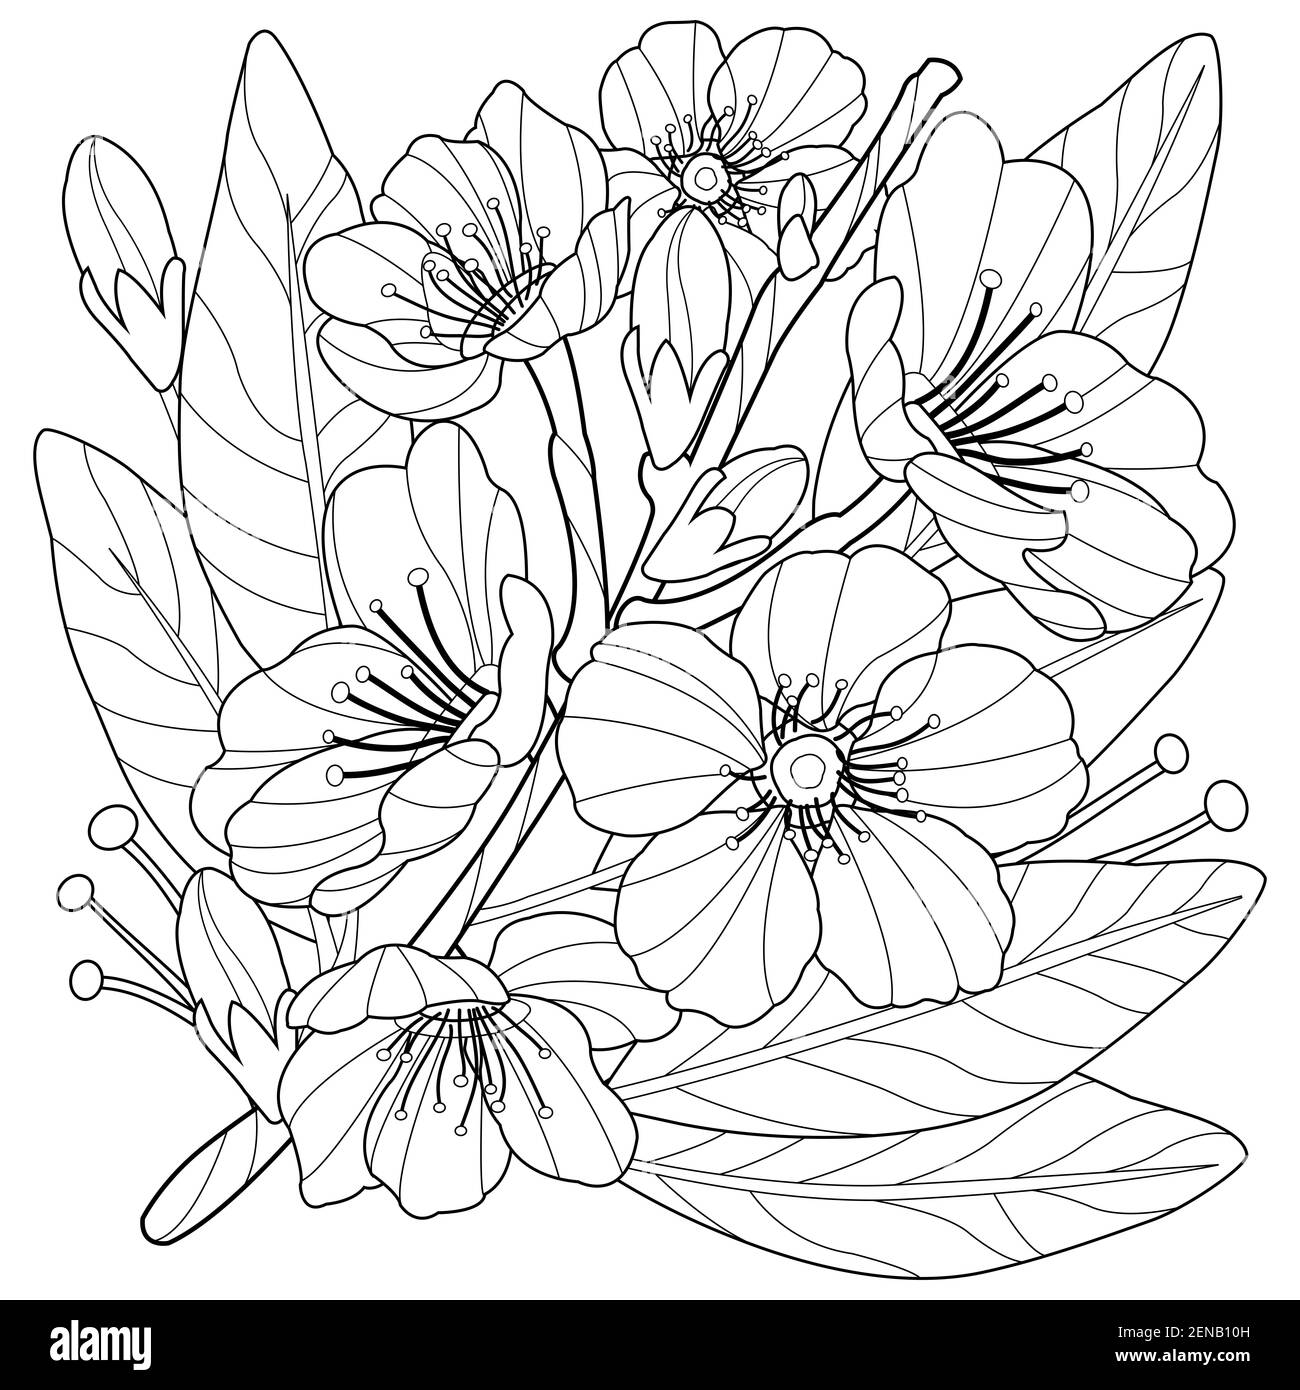 Blossoming almond tree branch with flowers. Black and white coloring page. Stock Photo